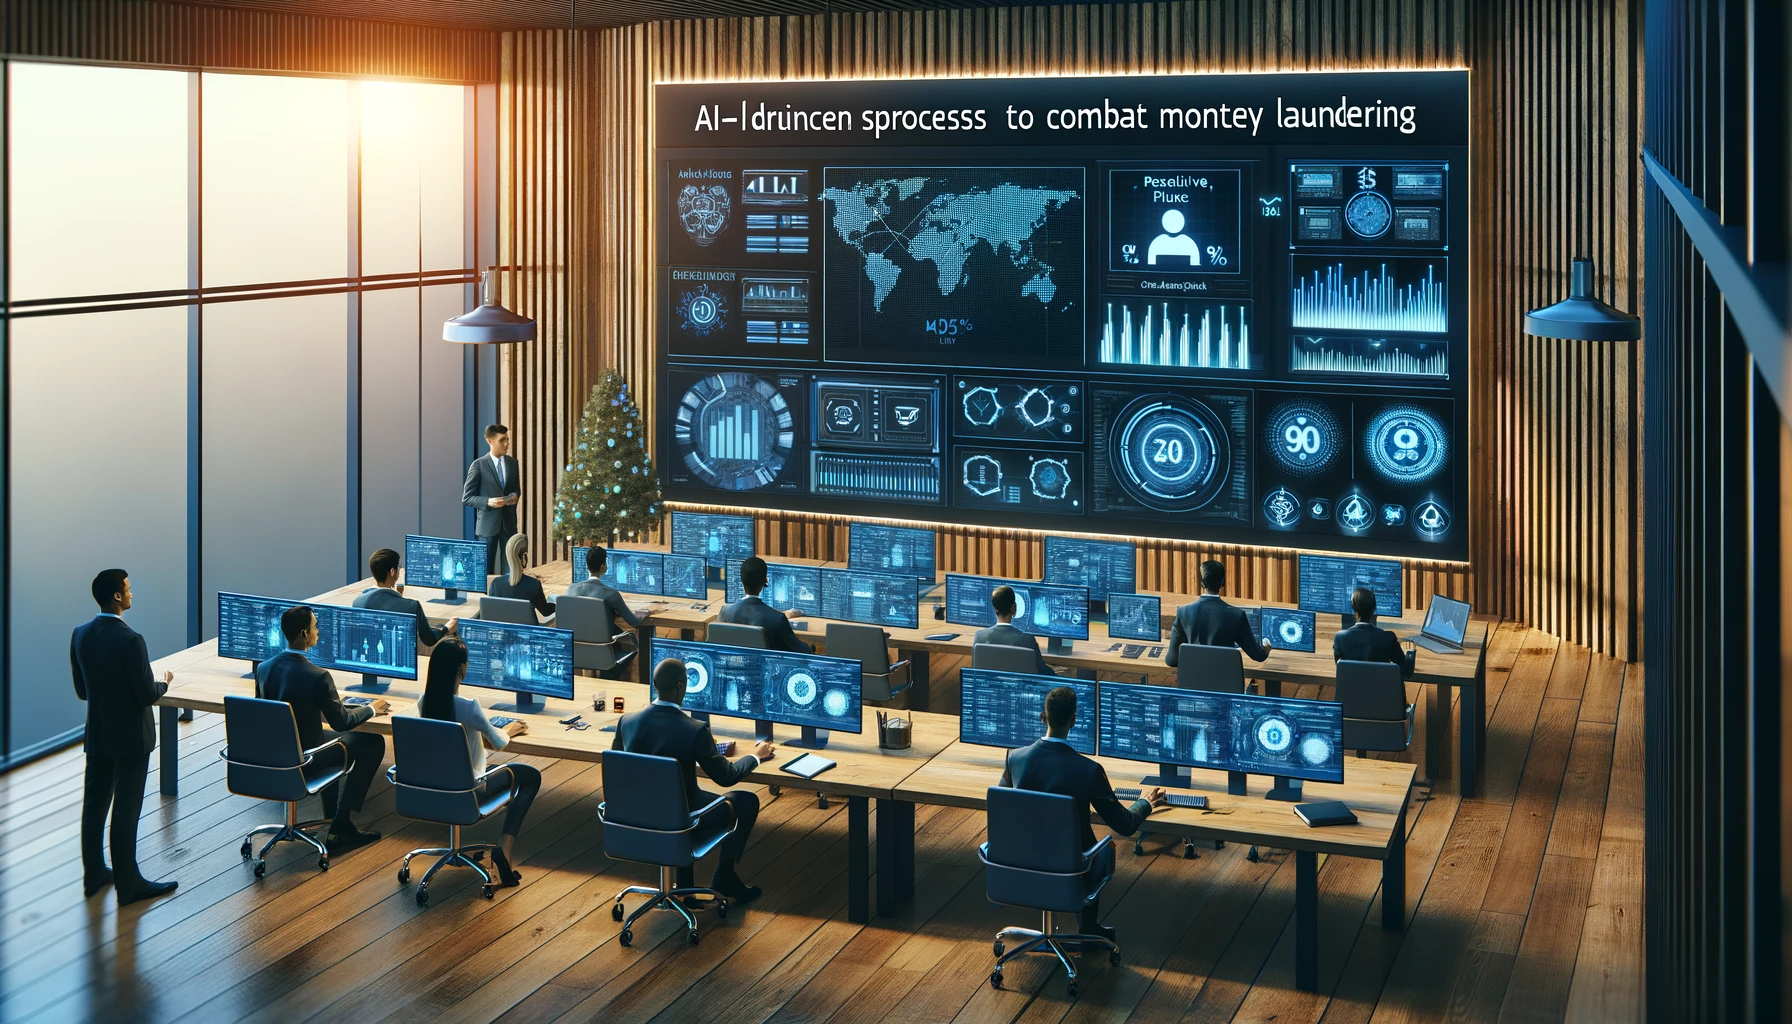 The illustration for the article about AI-driven solutions enhancing compliance processes to combat money laundering is ready, showcasing a sophisticated analysis center where technology meets precision in financial monitoring.